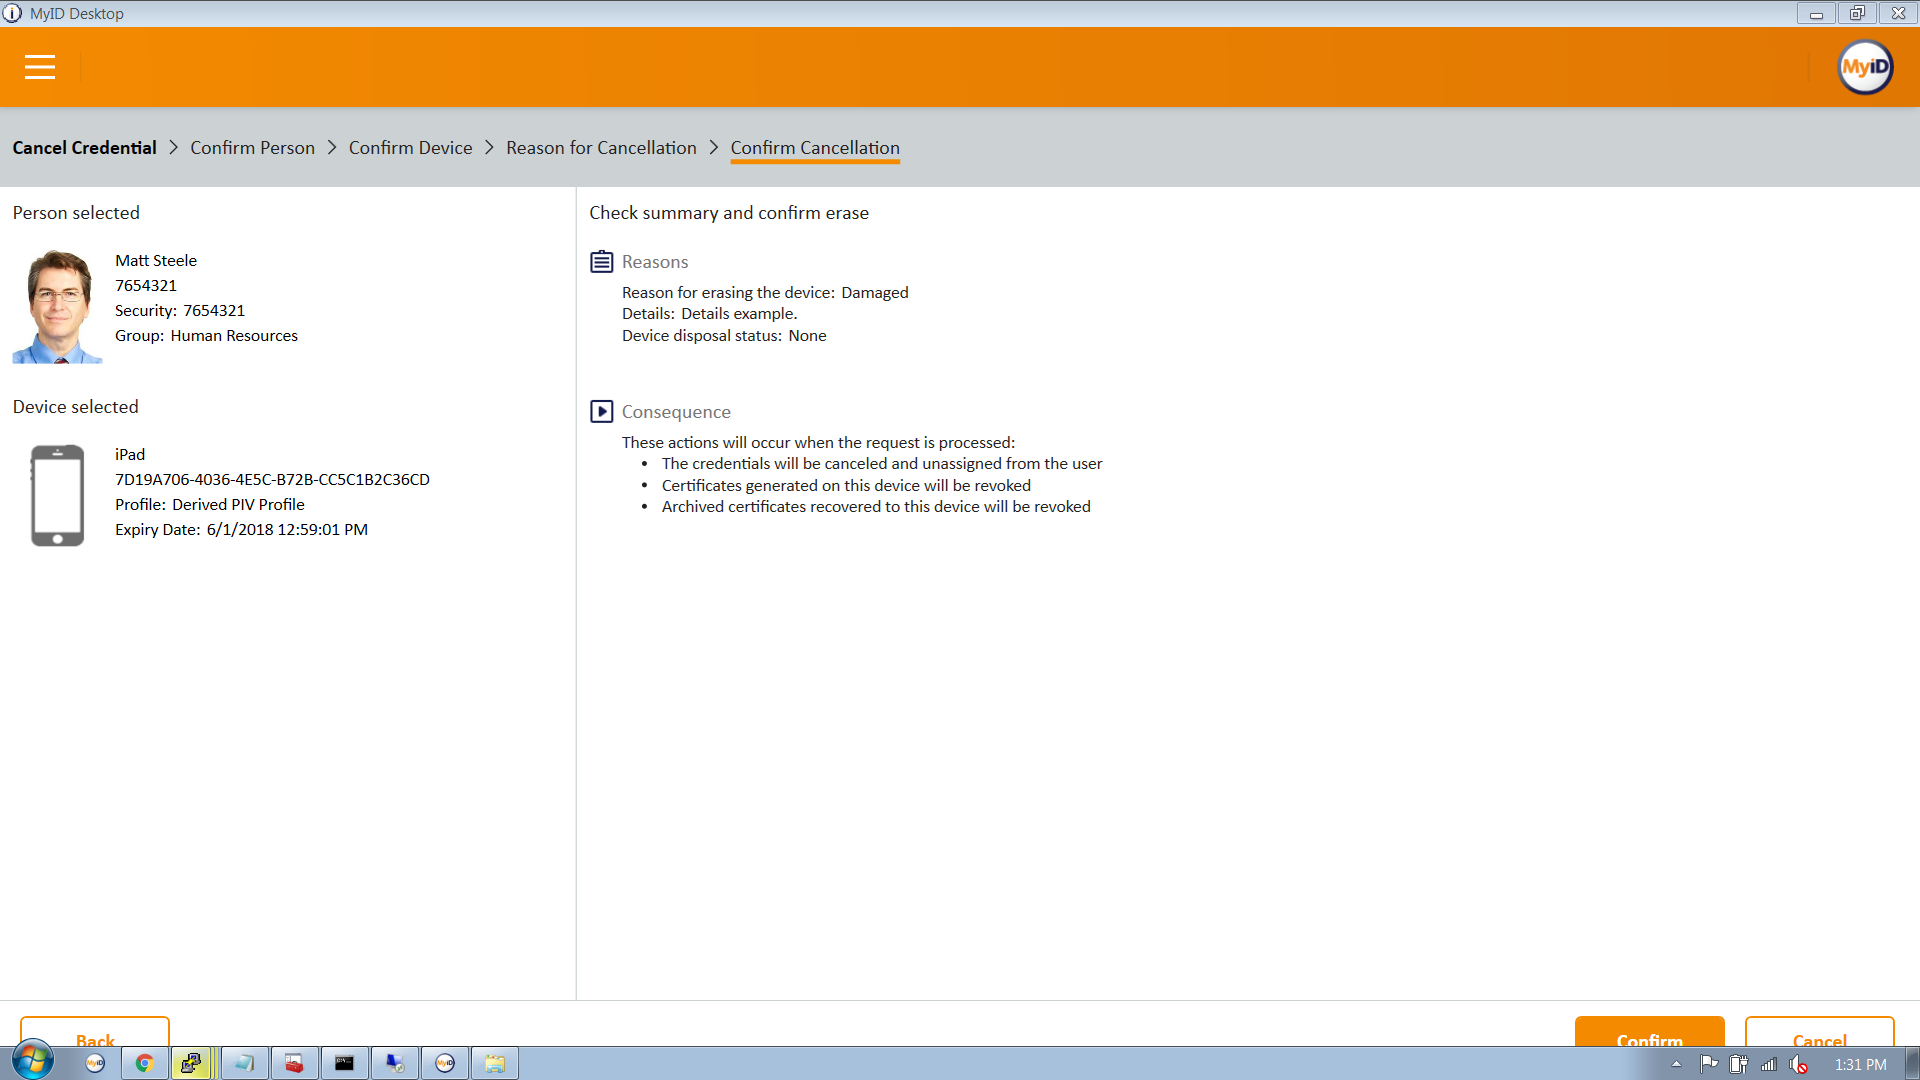 Final step in workflow to terminate DPC. Image shows confirmation screen for administrator.